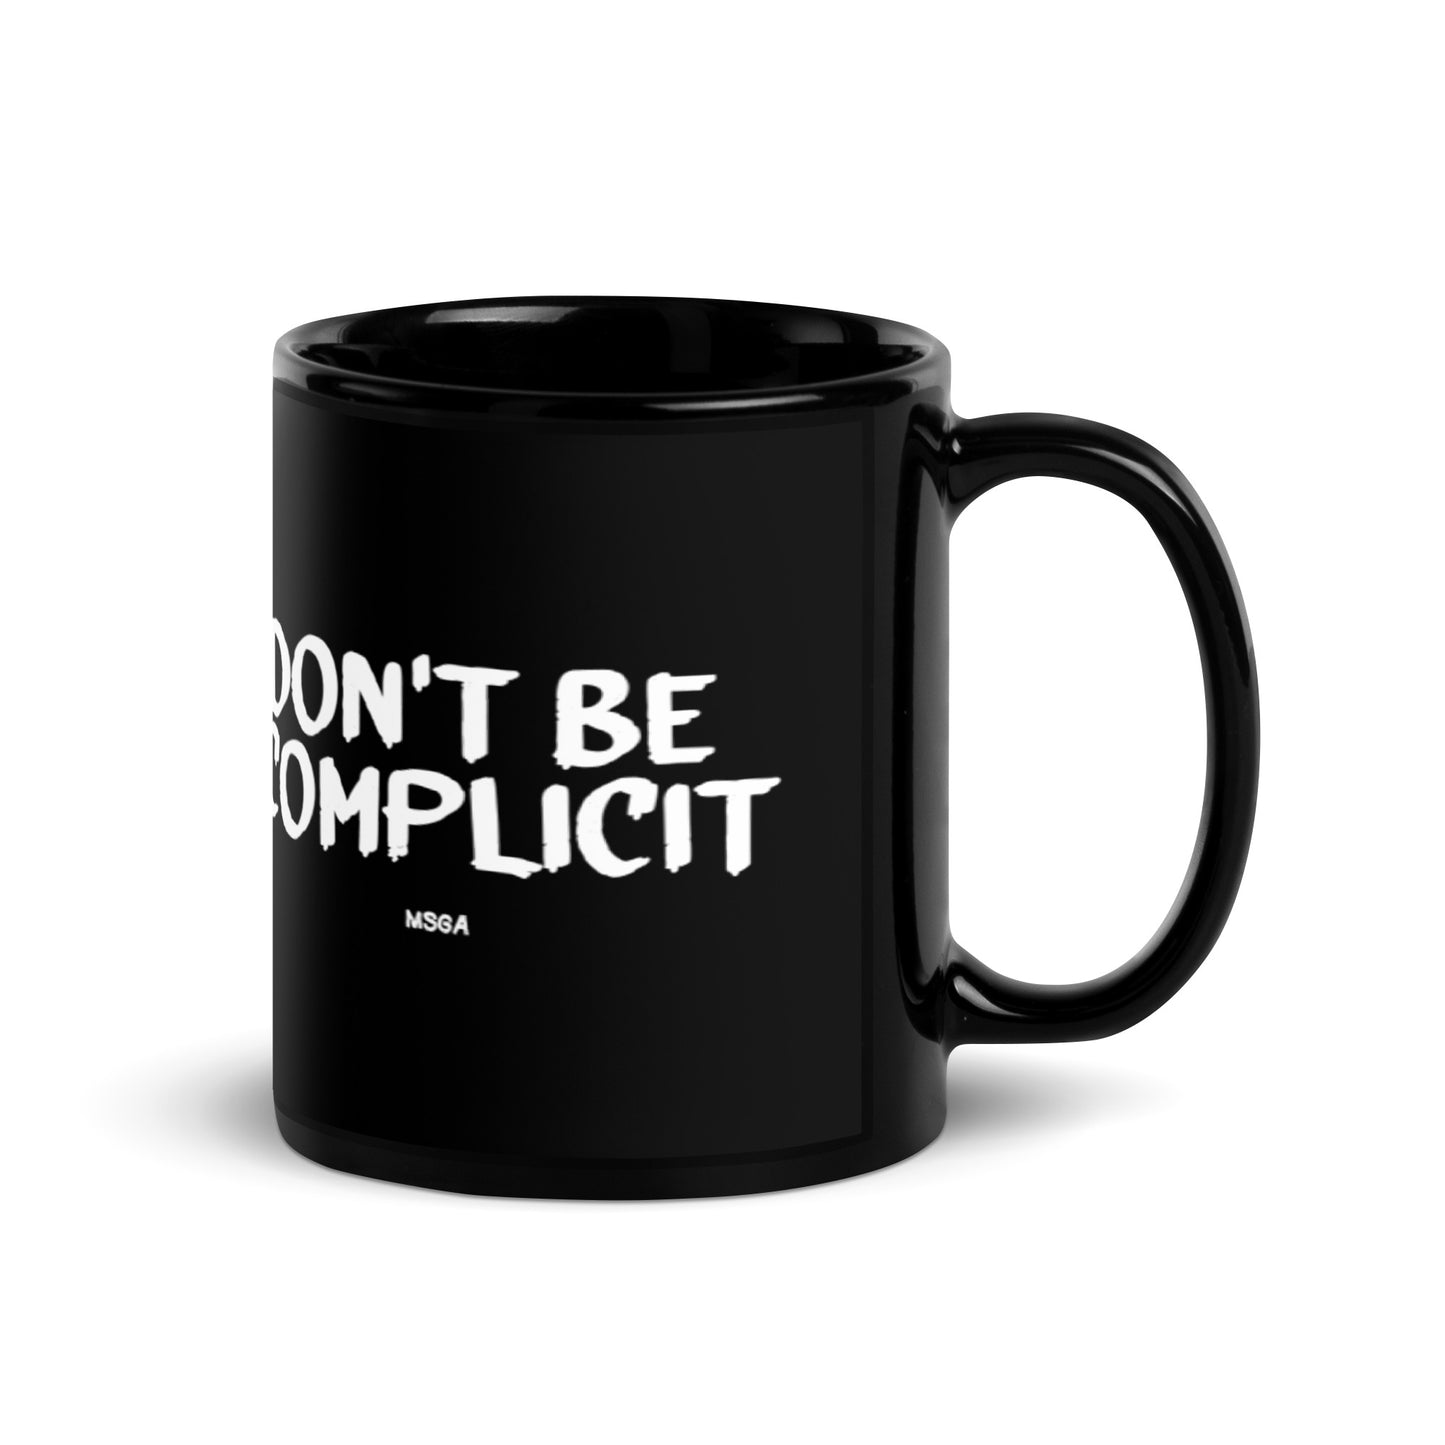 Don't Be Complicit Black Mug - Make Snitching Great Again